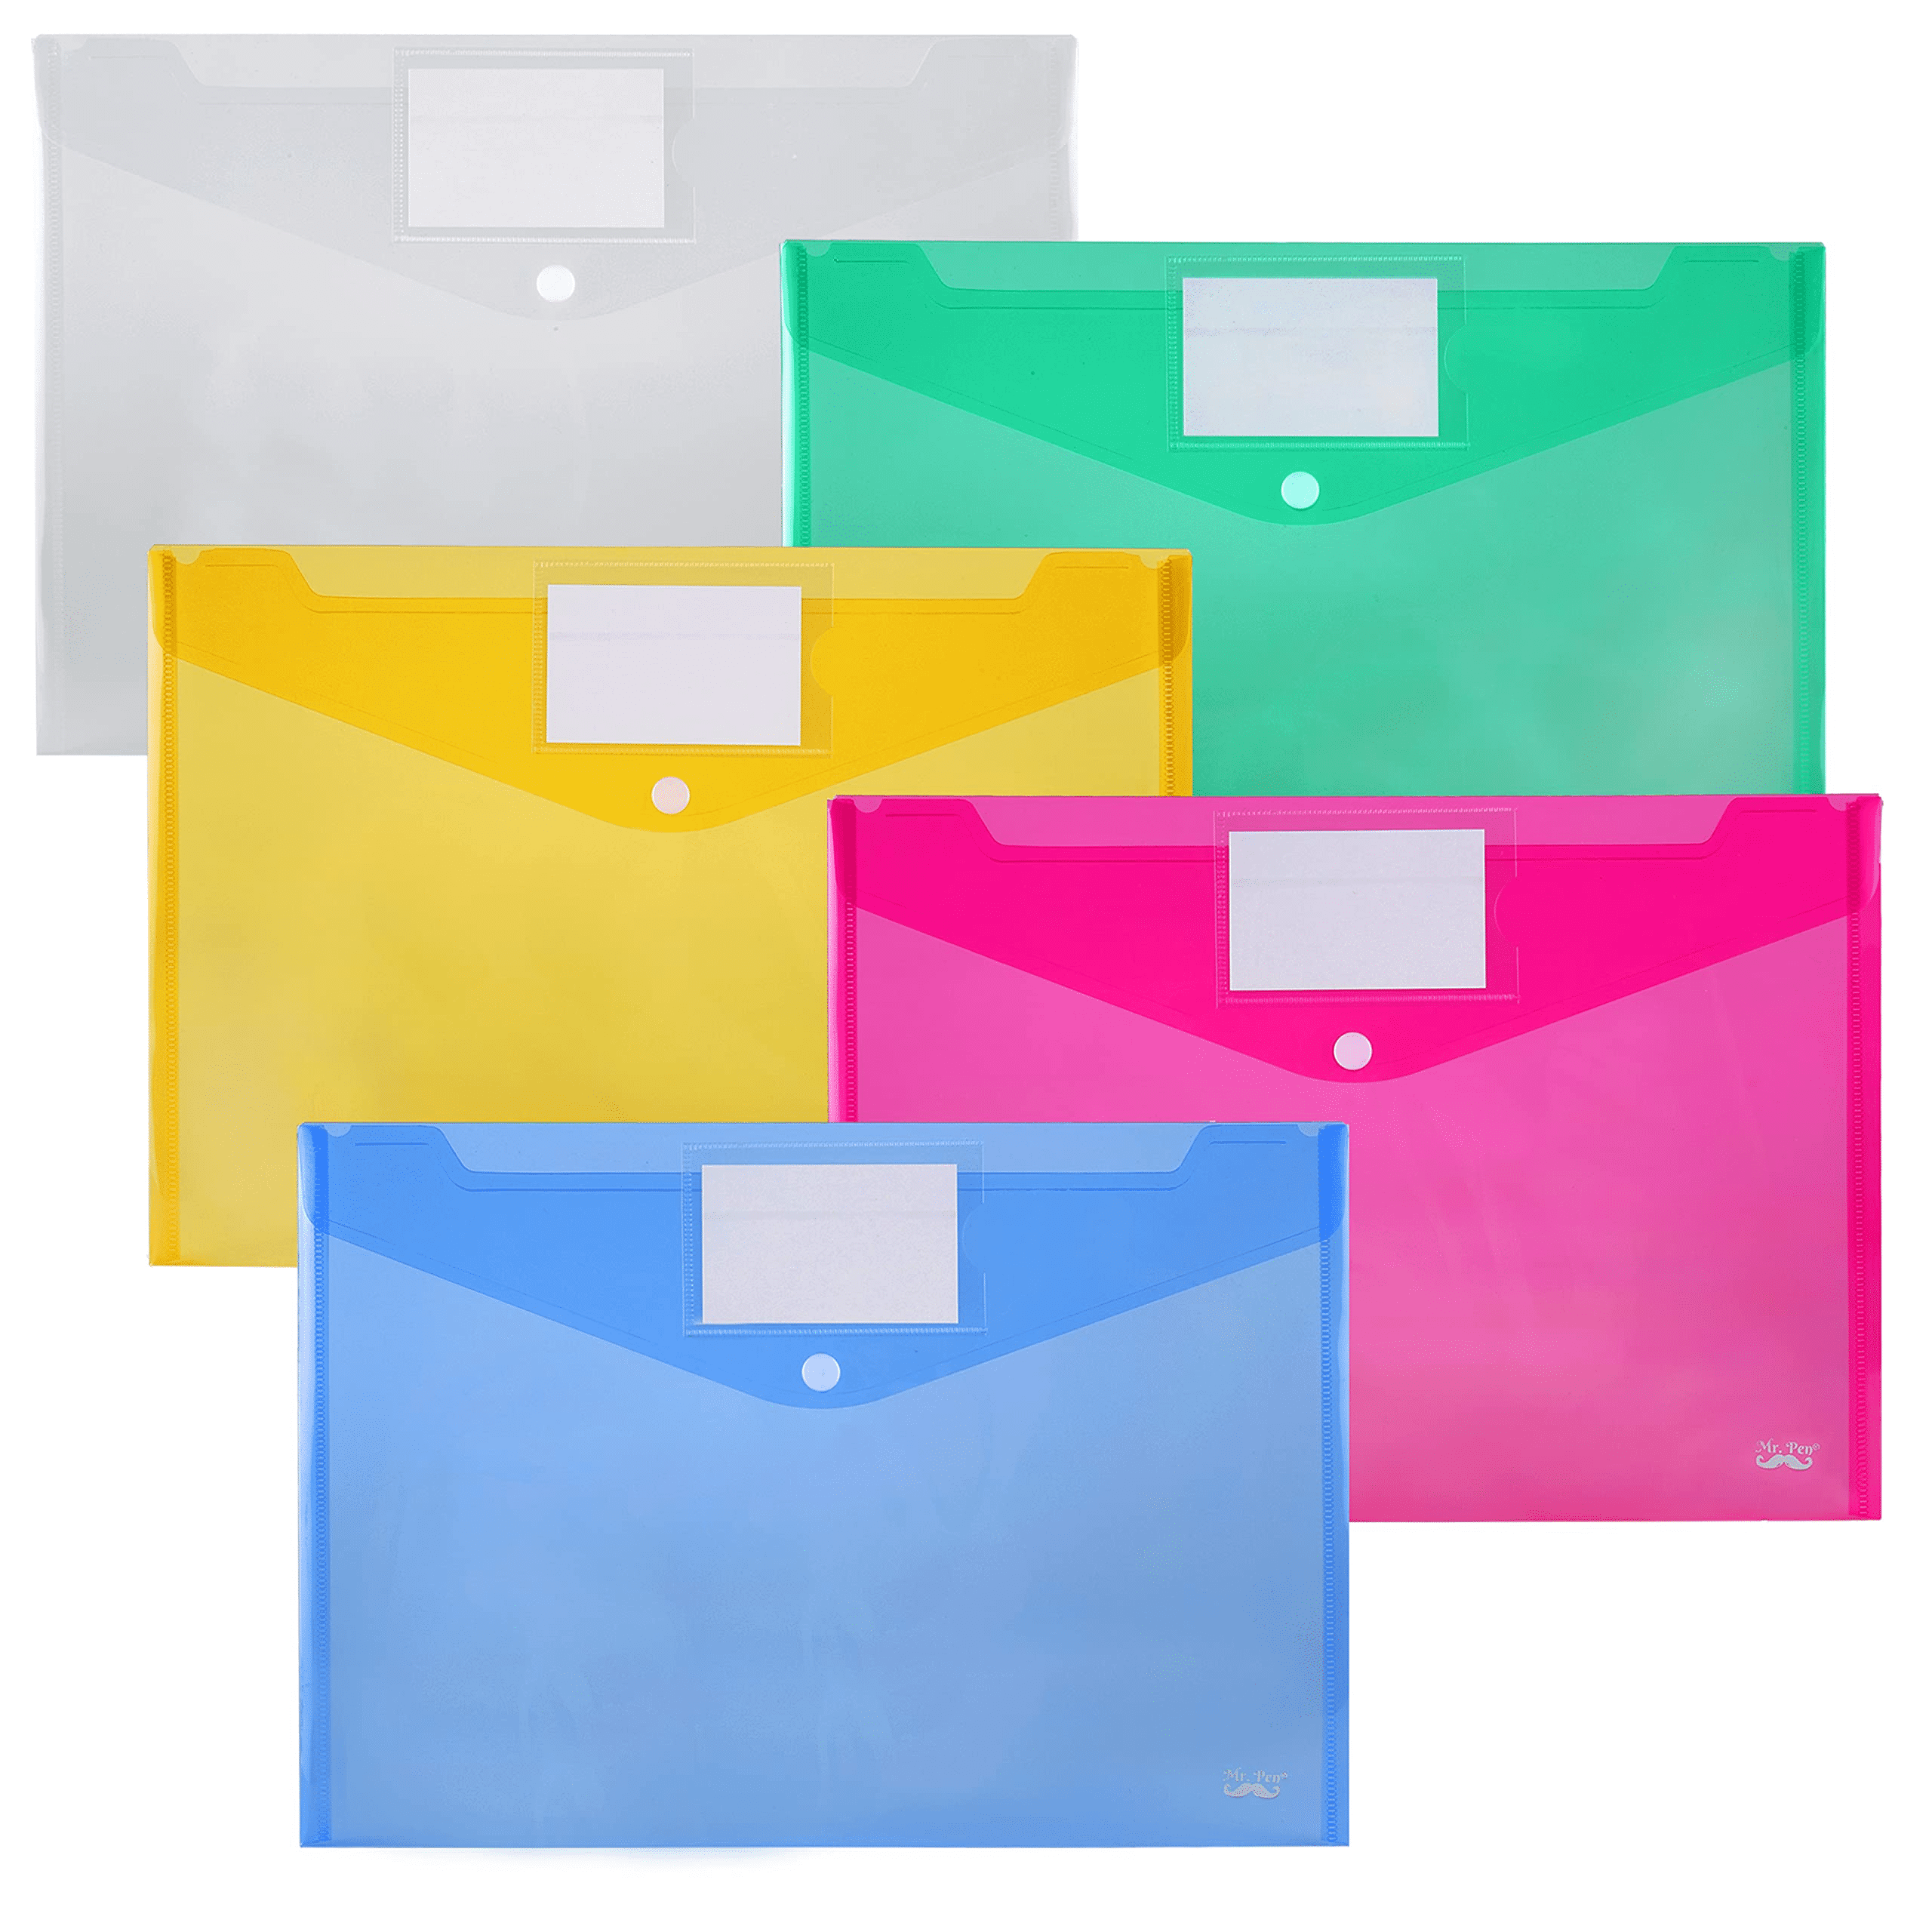 10 Pack Plastic Envelope with Snap Closure/Poly Envelopes,TFDLCG zm Clear  Document Folders,A4 Letter Size(13×9.5) for School Home Work